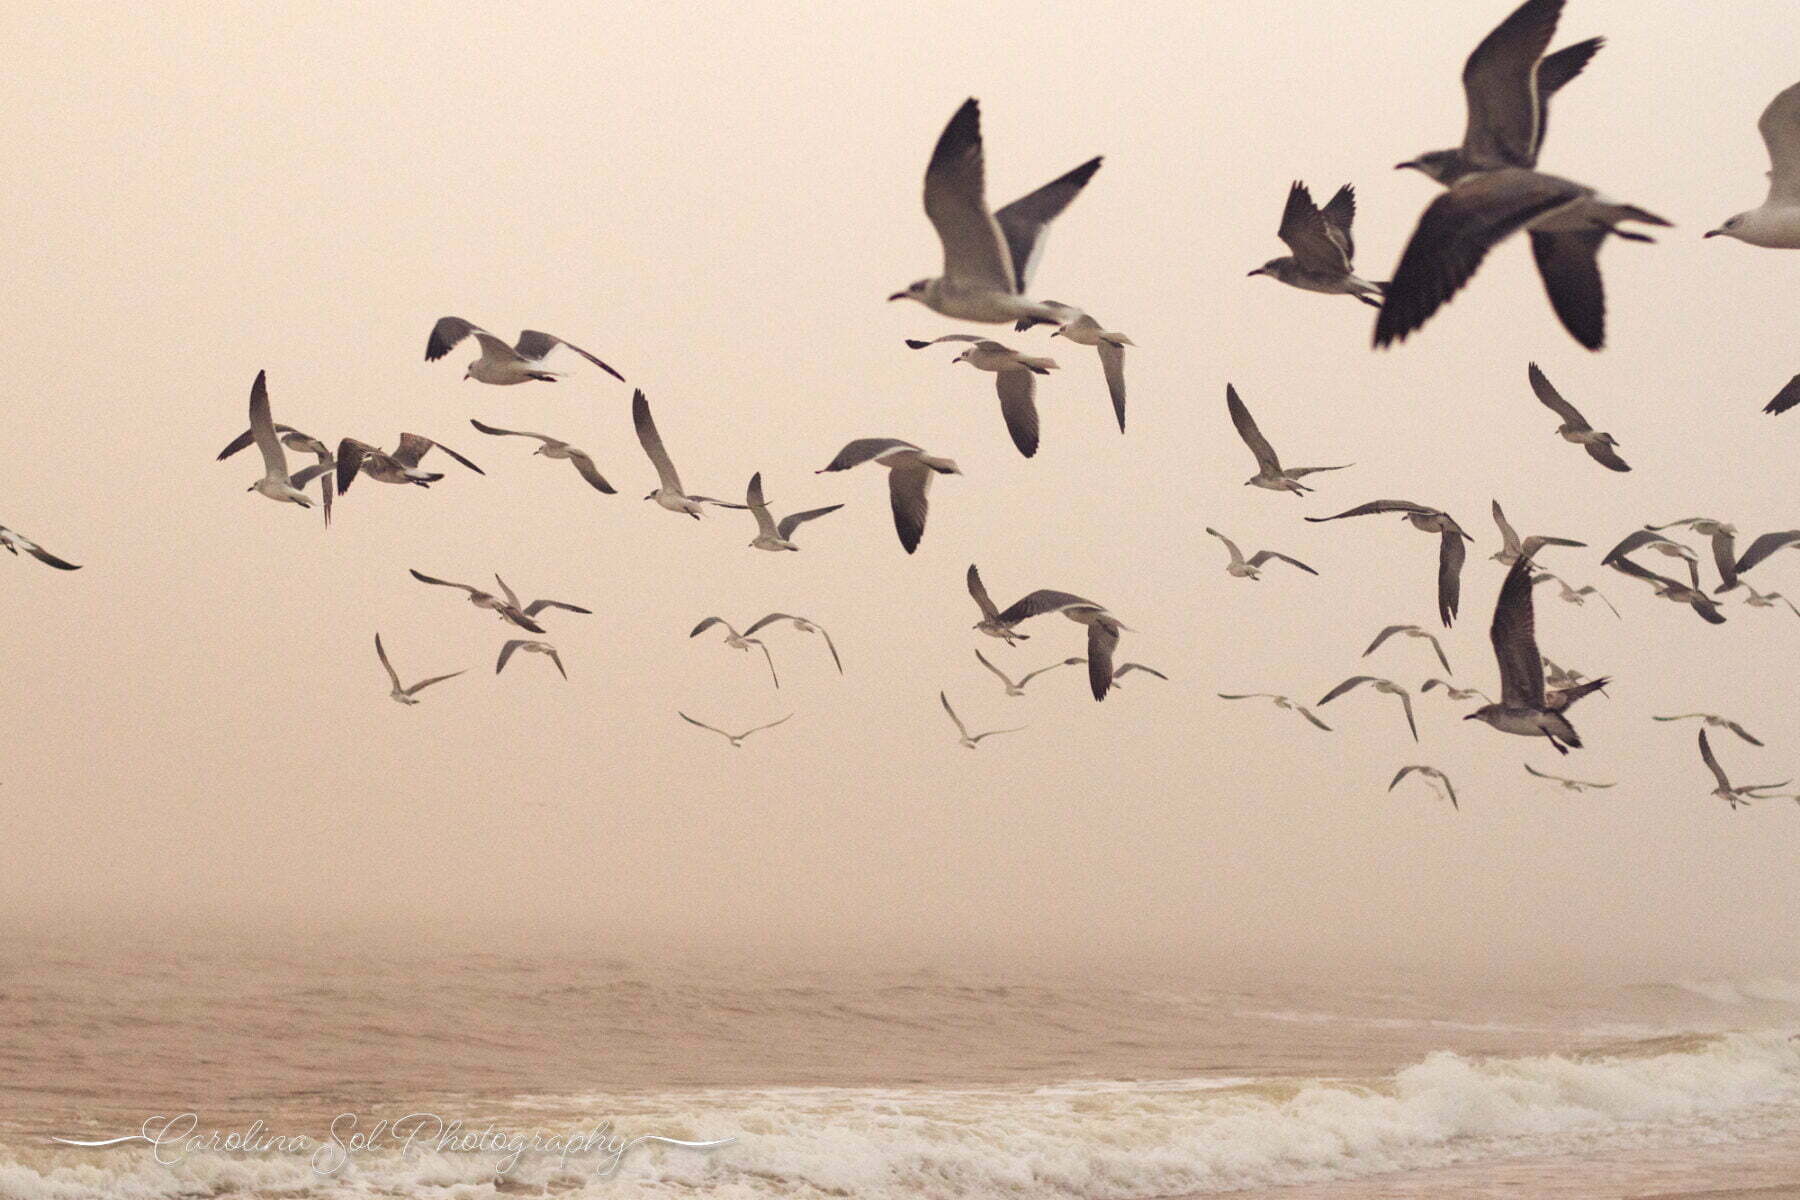 Holden Beach, NC seagulls in flight during foggy sunset landscape photography.